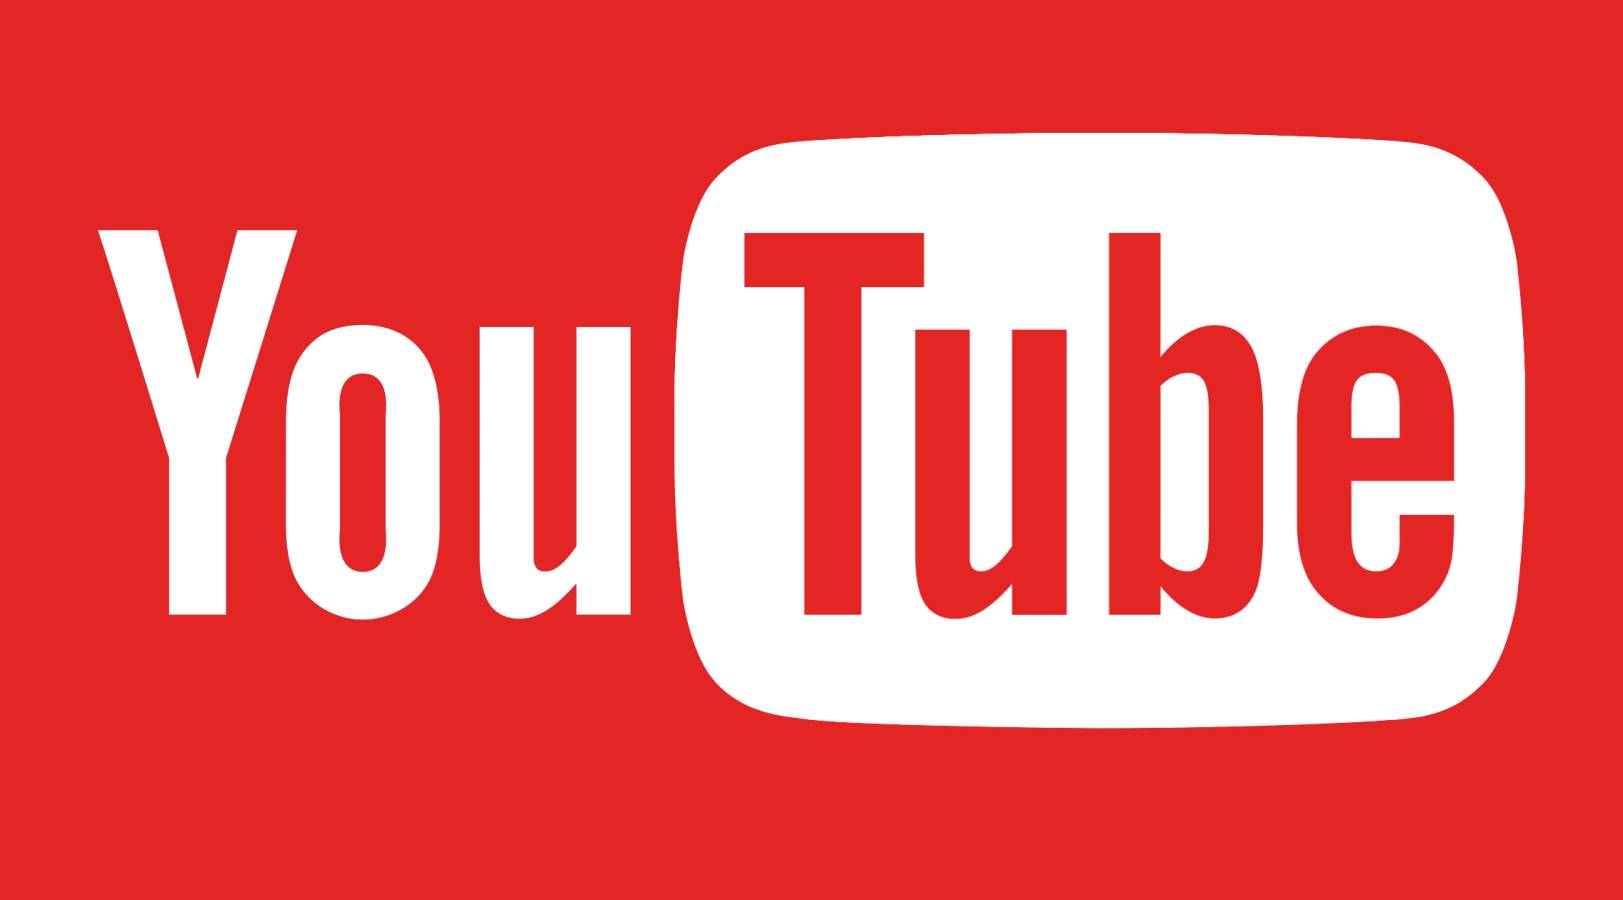 YouTube has Updated its Application, what News are Offered in Phones and Tablets